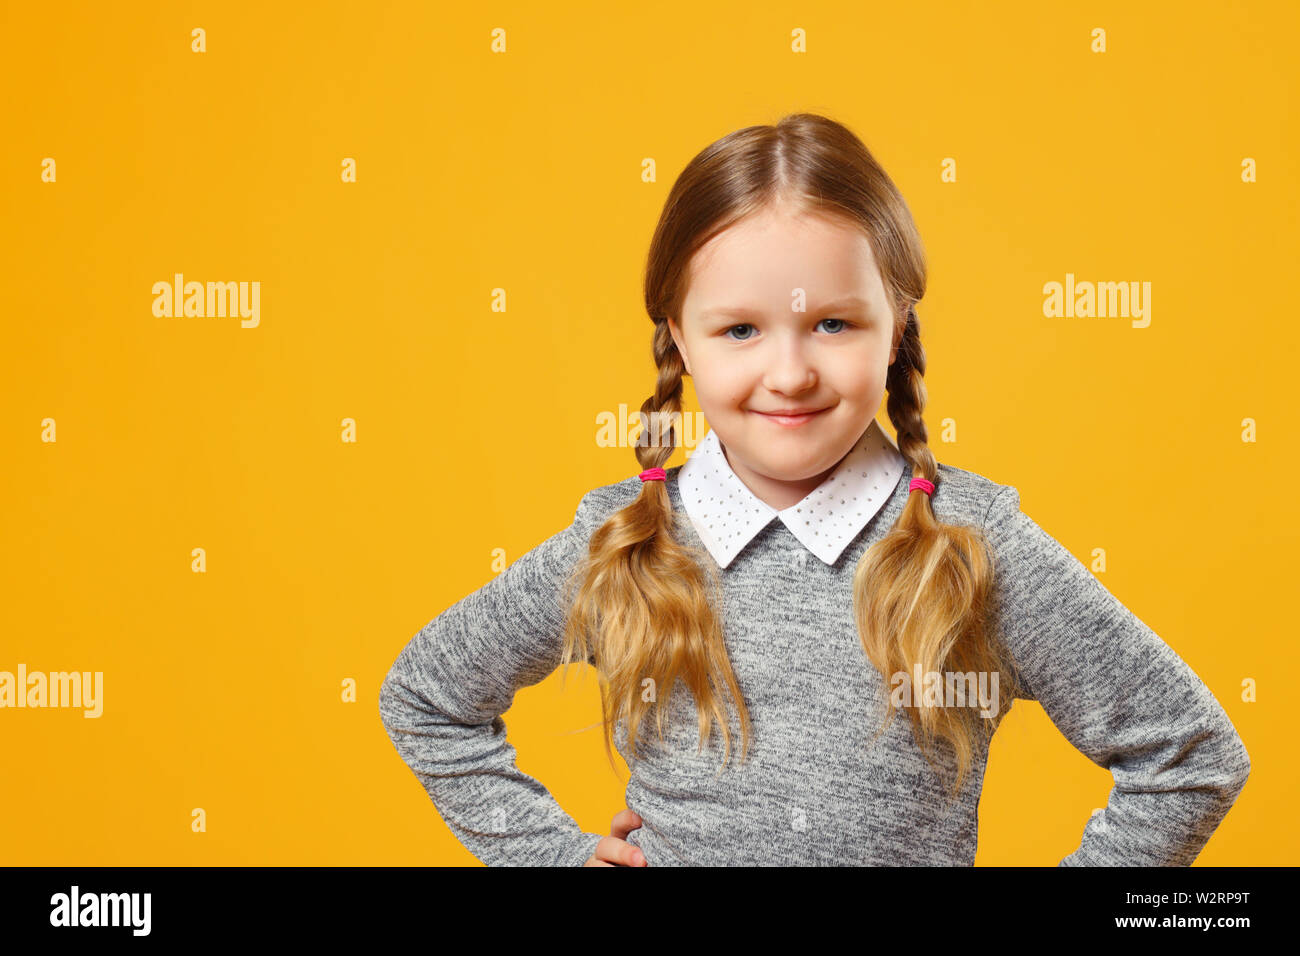 Portrait of a cute little girl on a yellow background. Child schoolgirl made hands to the side and looks into the camera. The concept of education. Stock Photo